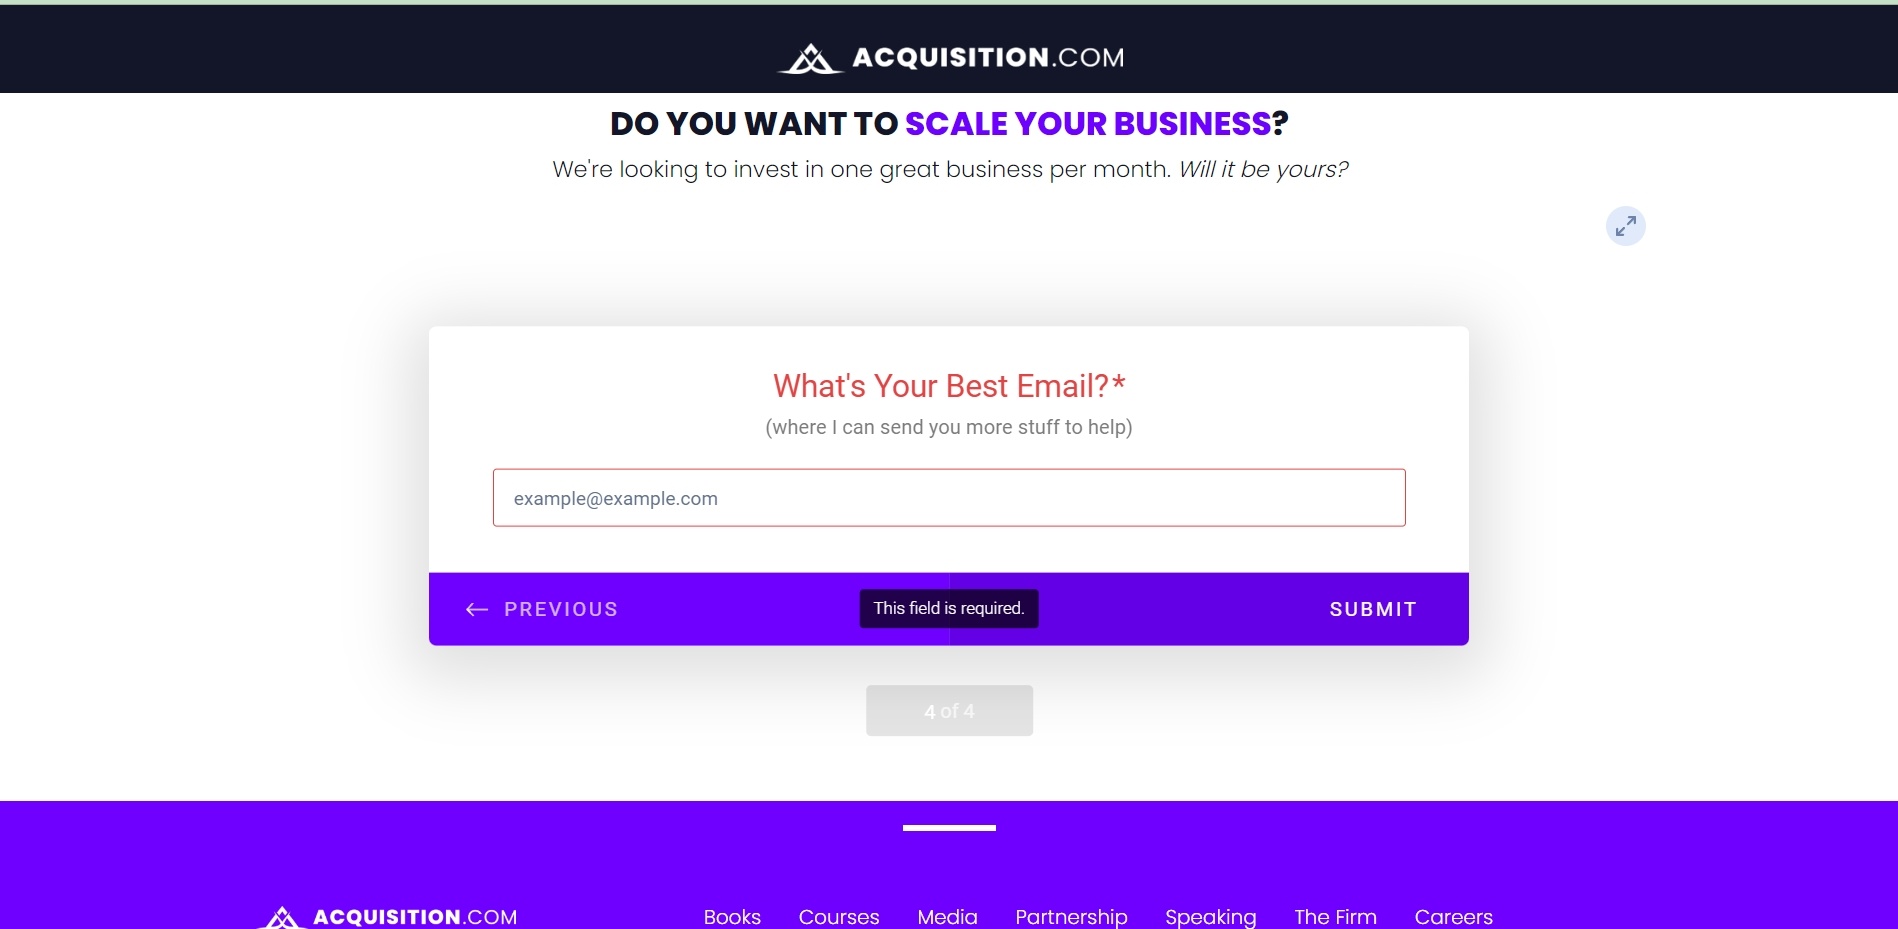 Acquisition.com’s has an email sign up offer for people who want to scale their business